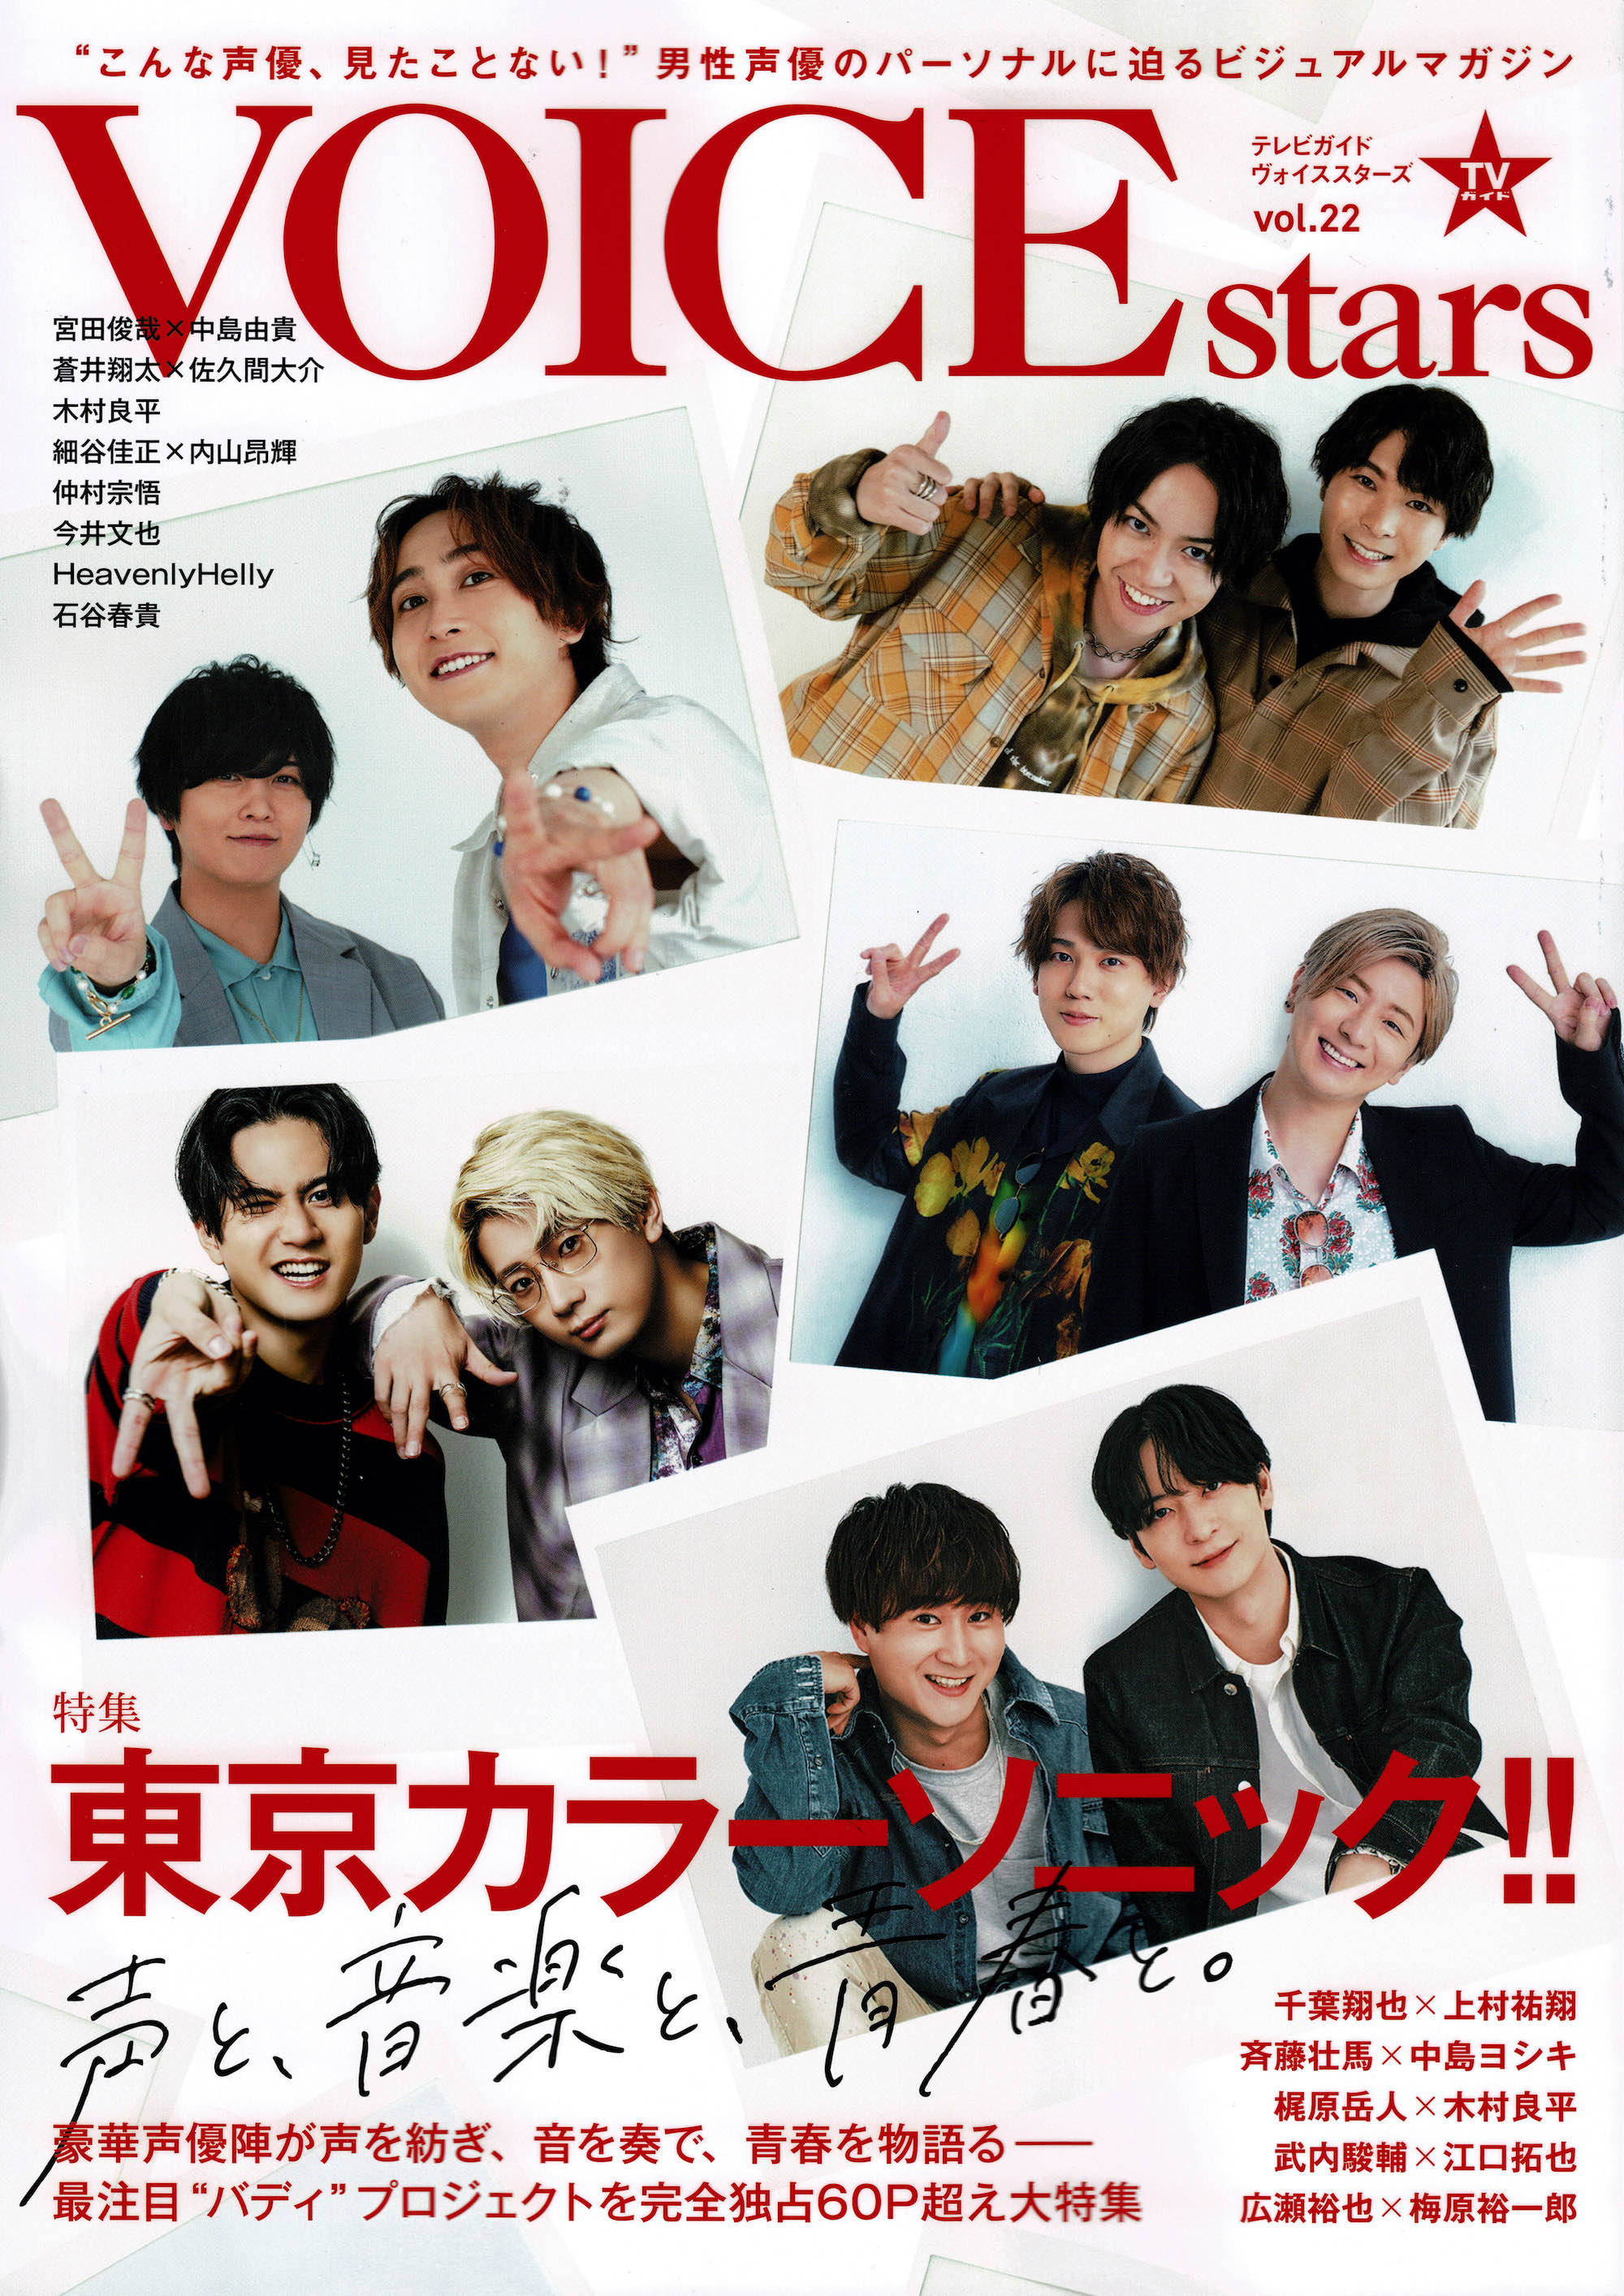 Listed Products on VOICE stars vol.22